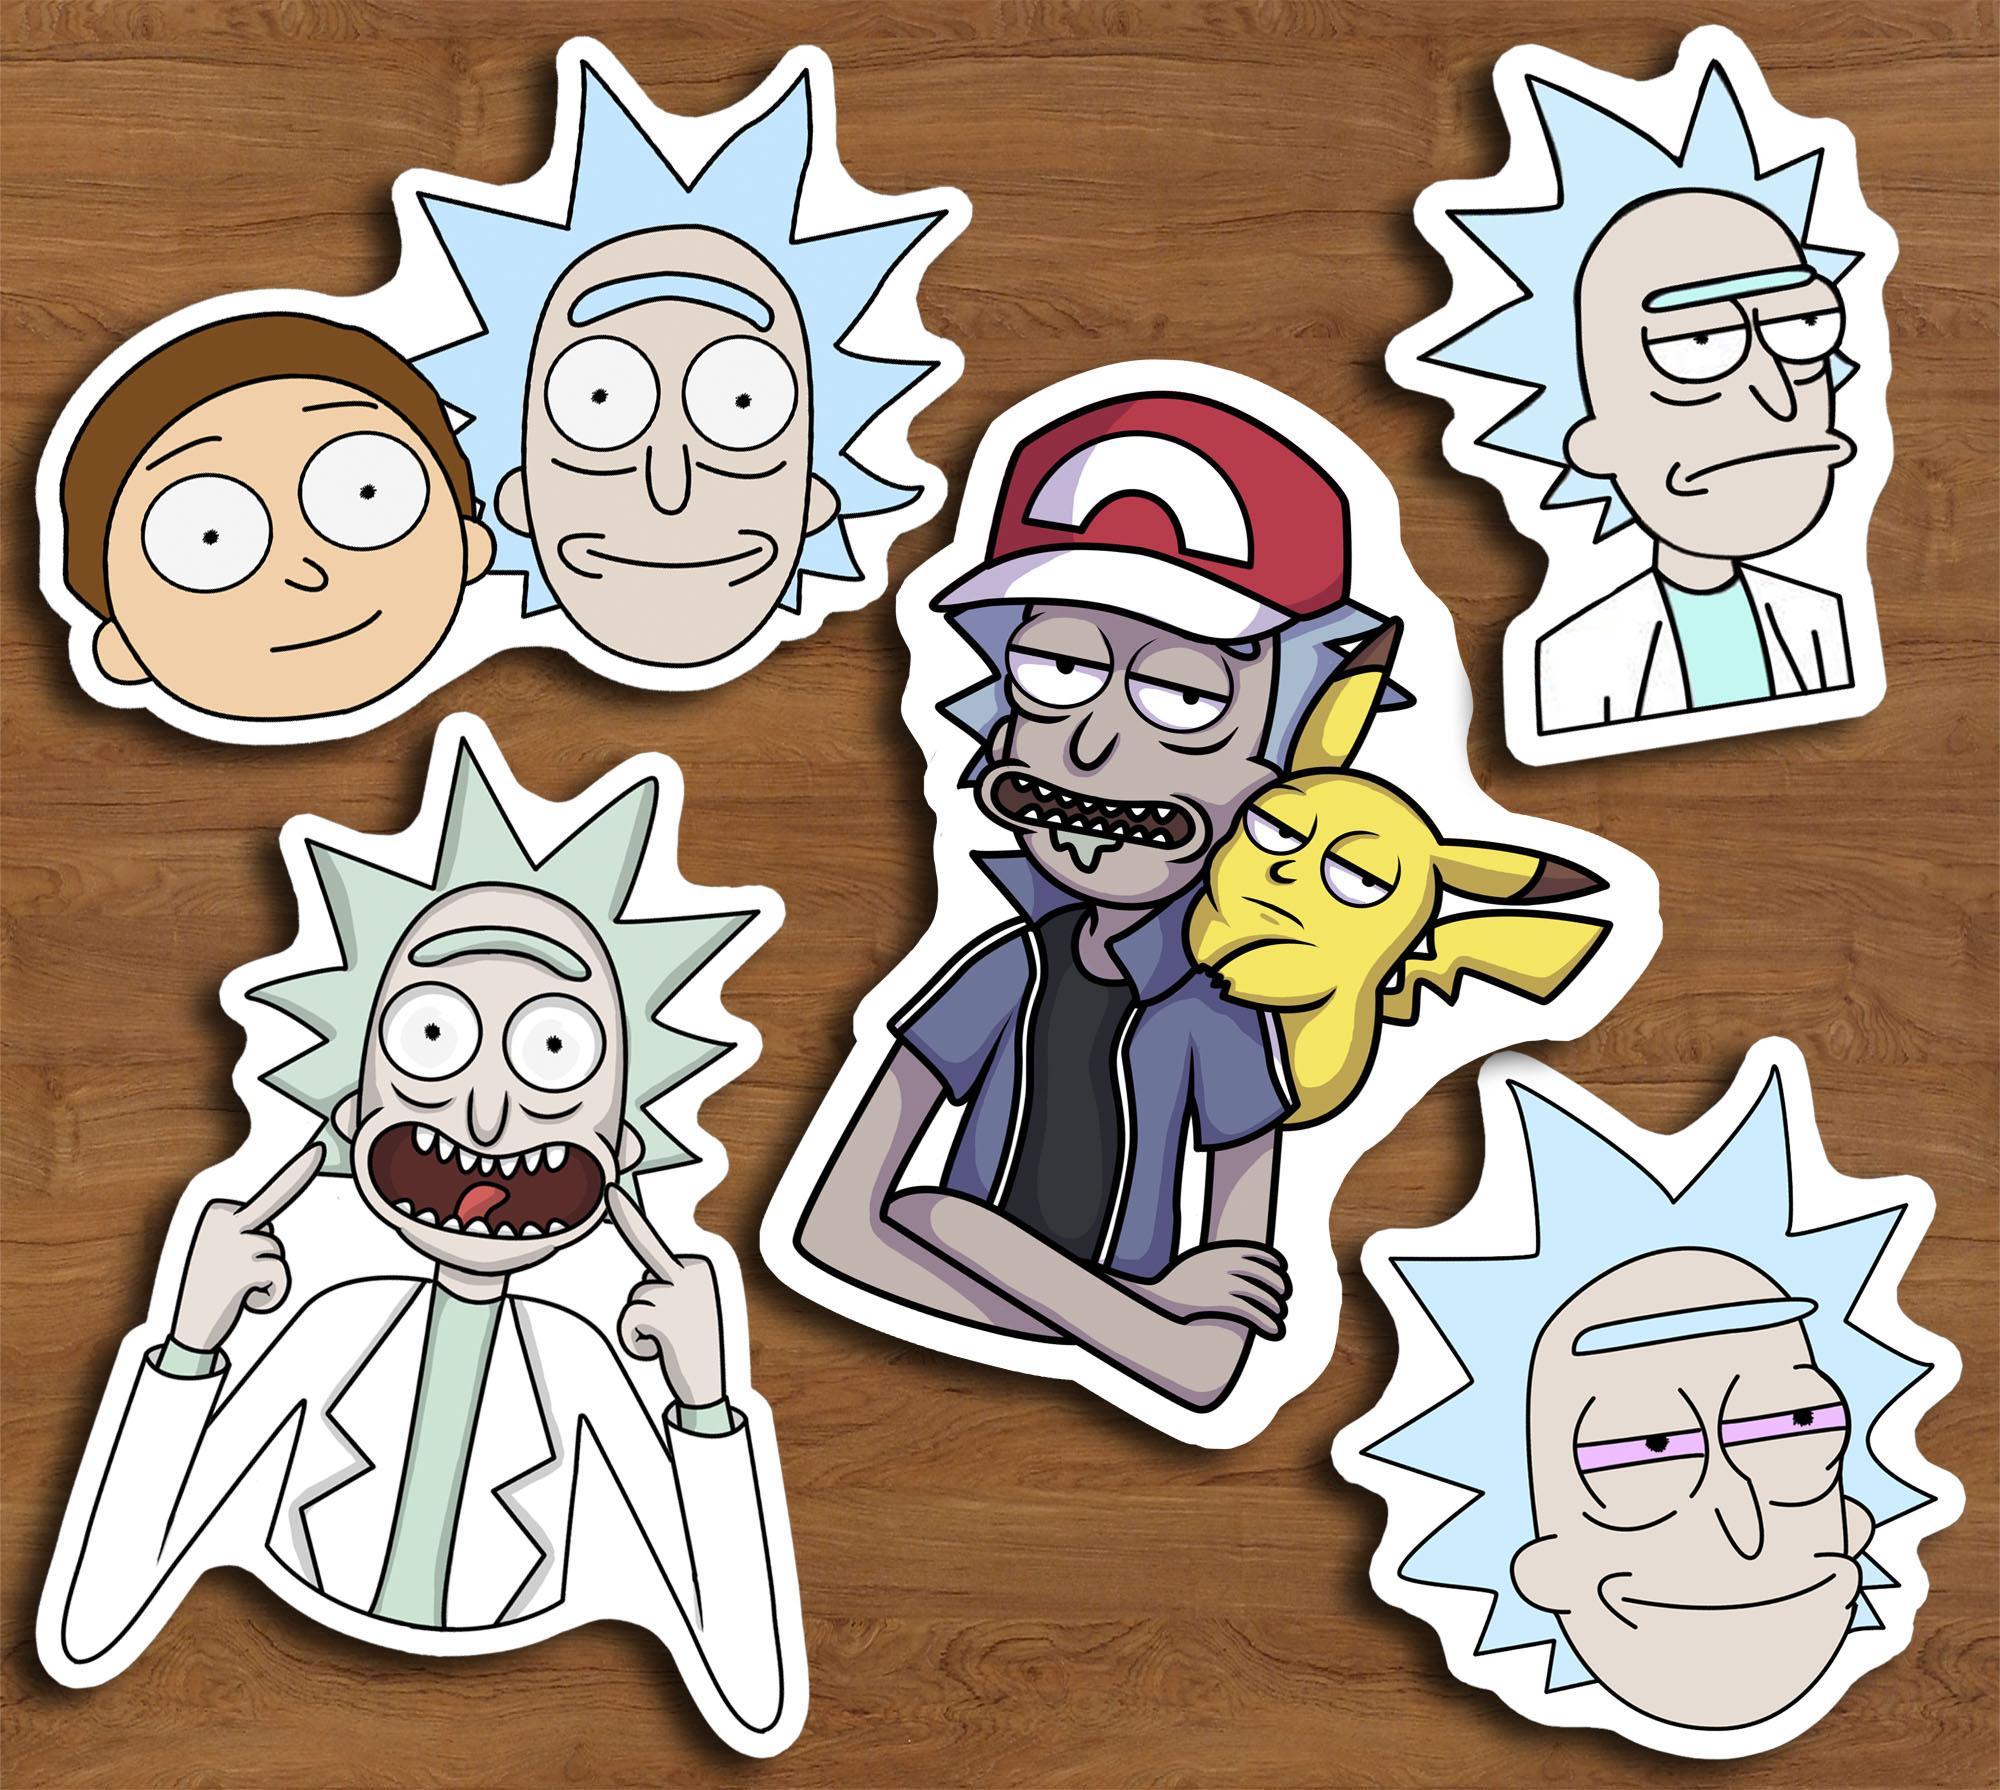 Rick and Morty Стикеры